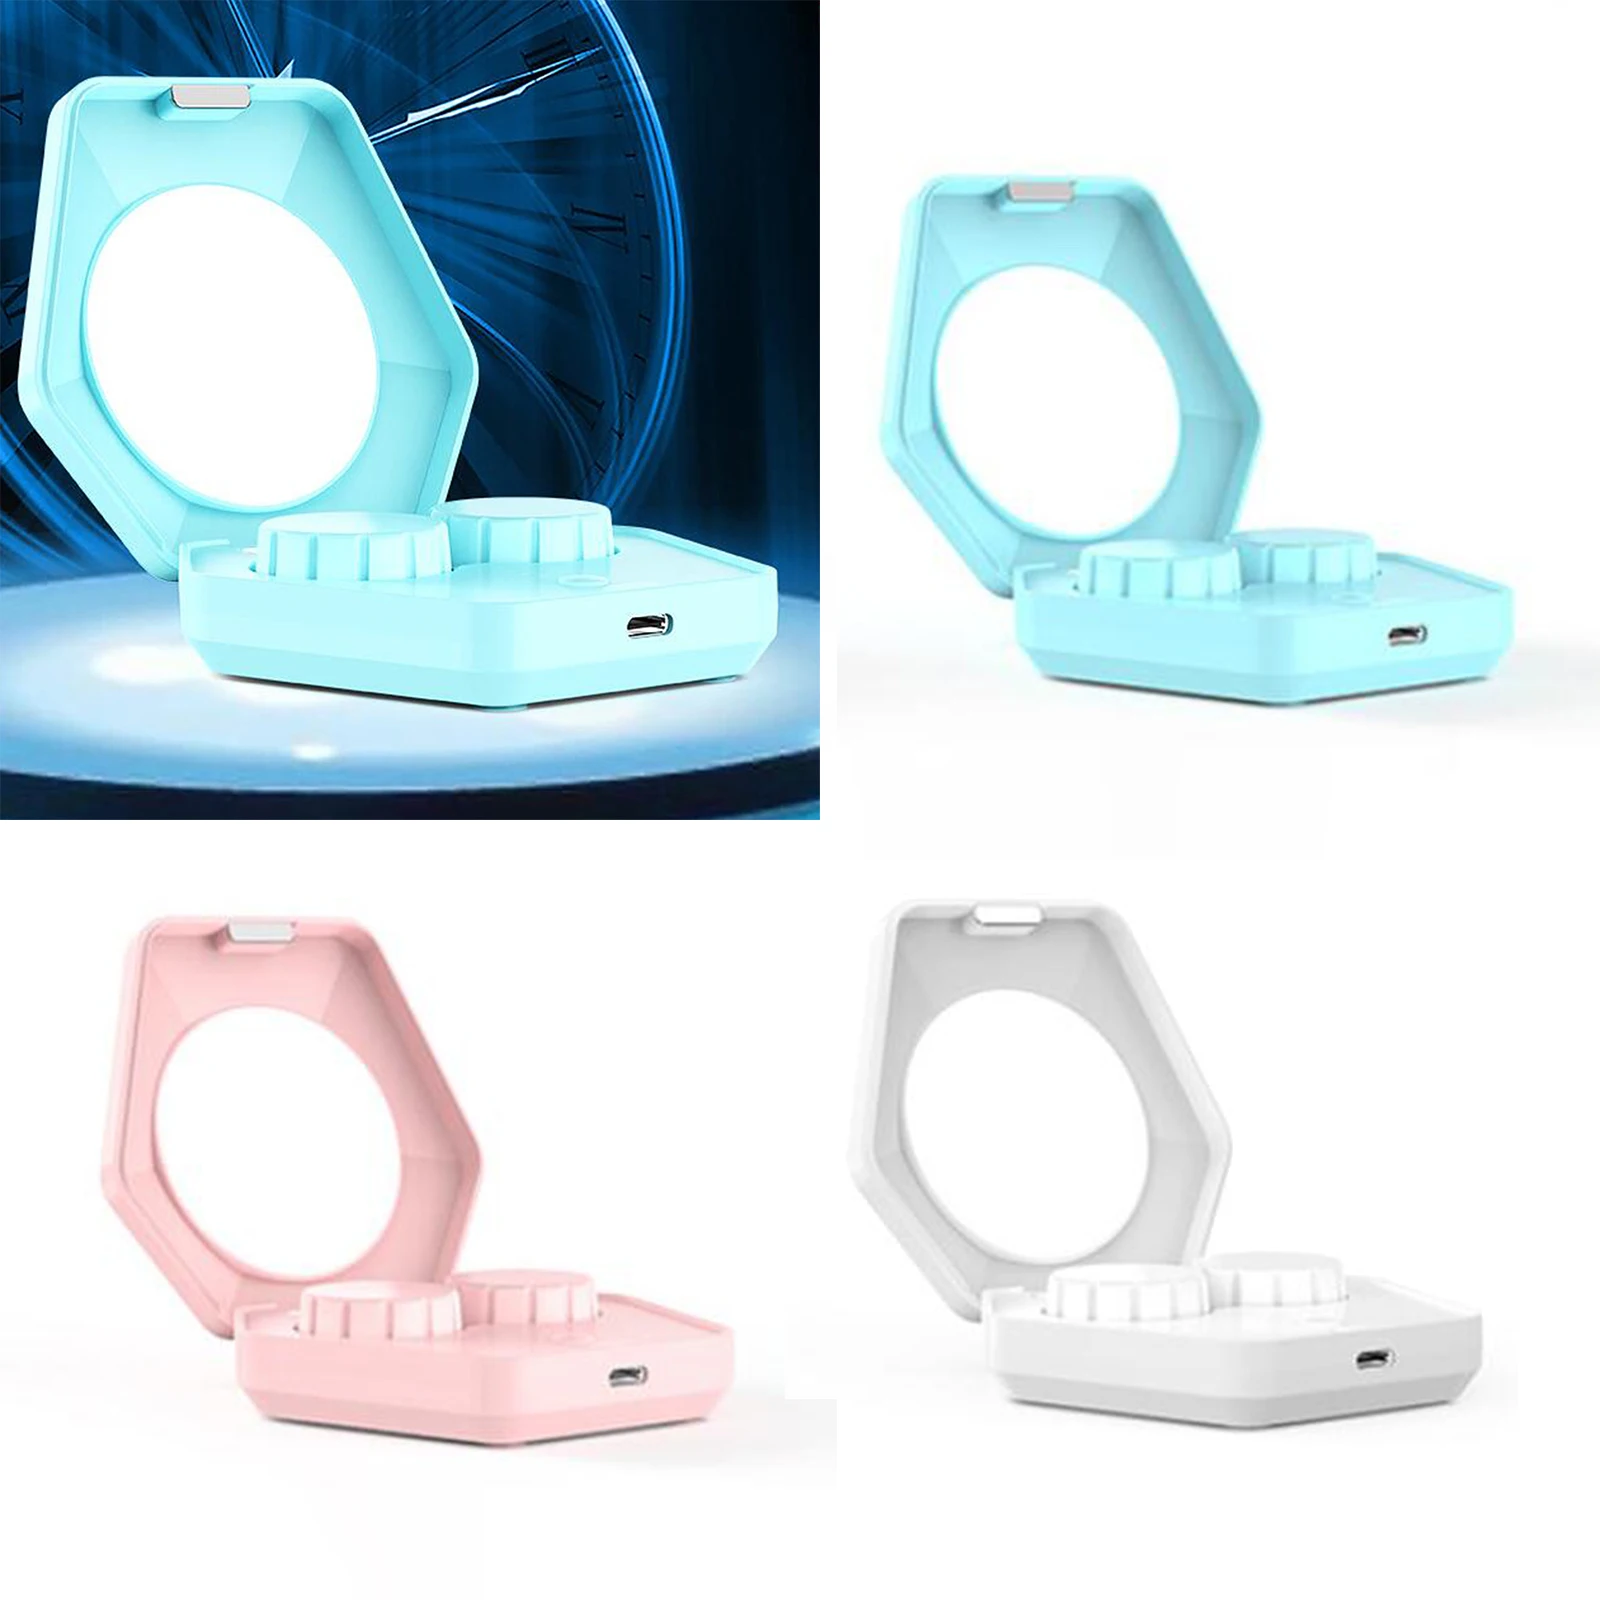 Mute Ultrasonic Contact Lens Cleaner Washer, USB Rechargeable, for Colored Contact Lens Daily Care Faster Cleaning